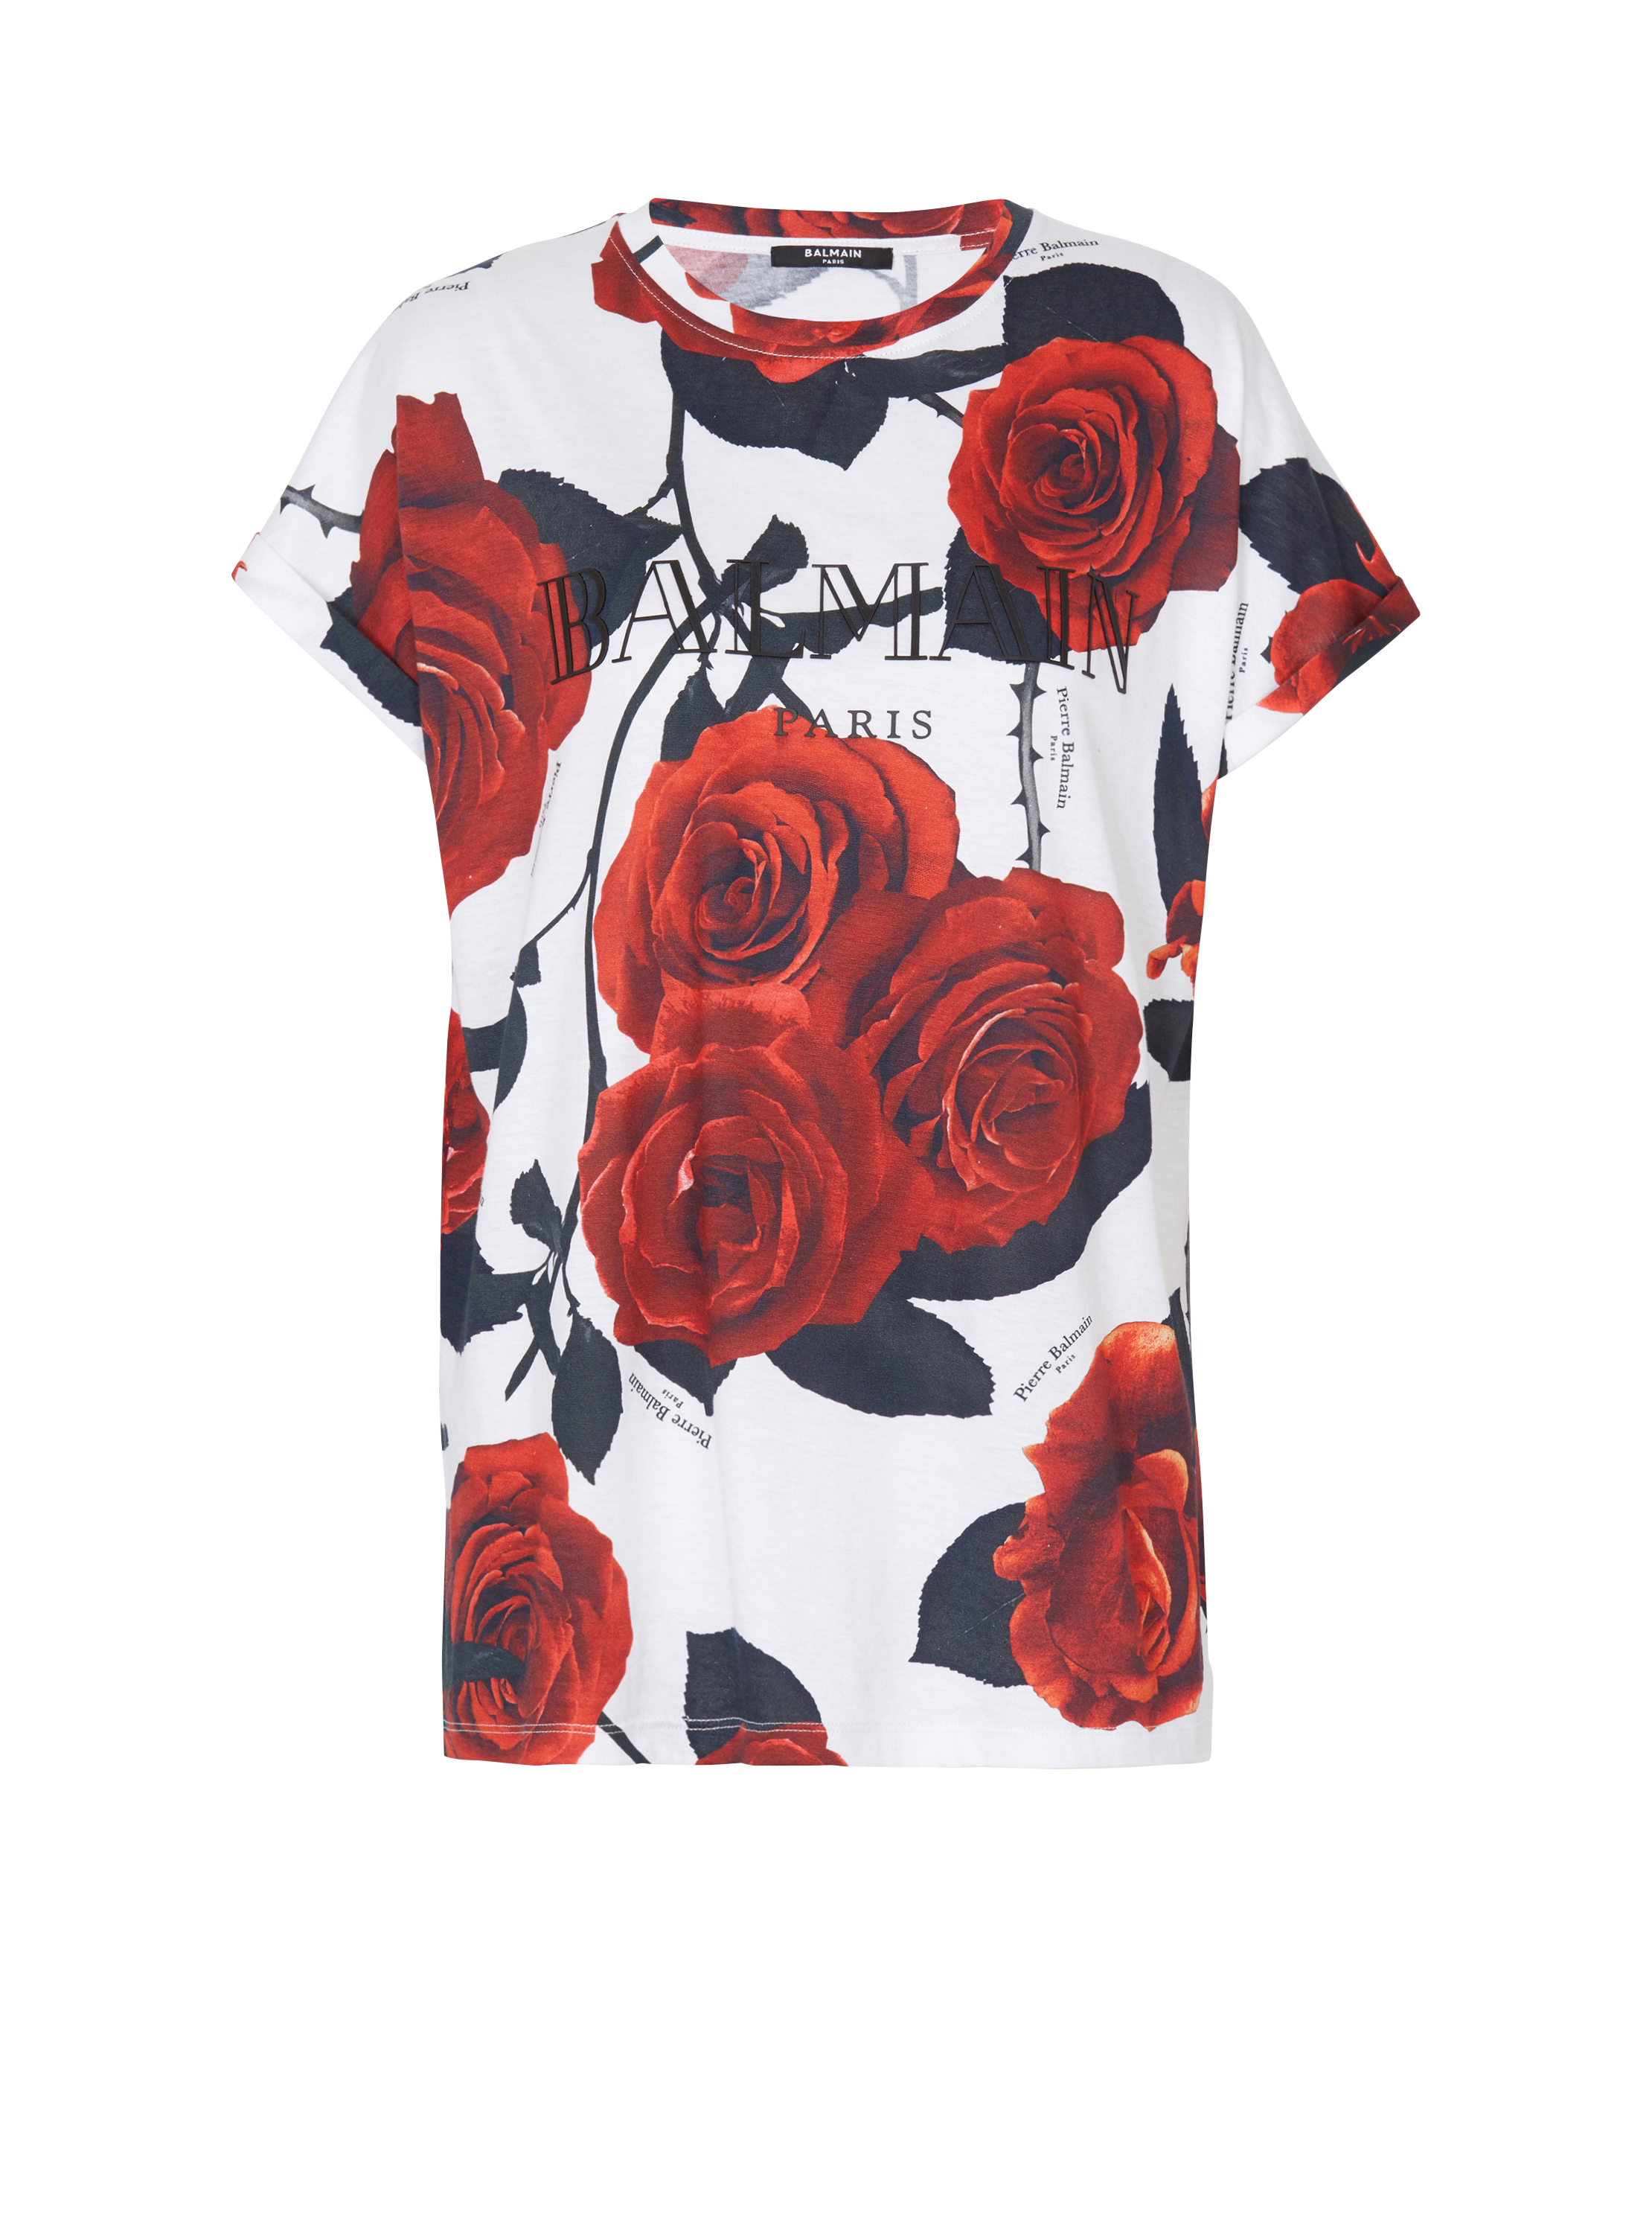 Vintage Balmain T-shirt with Red Roses print